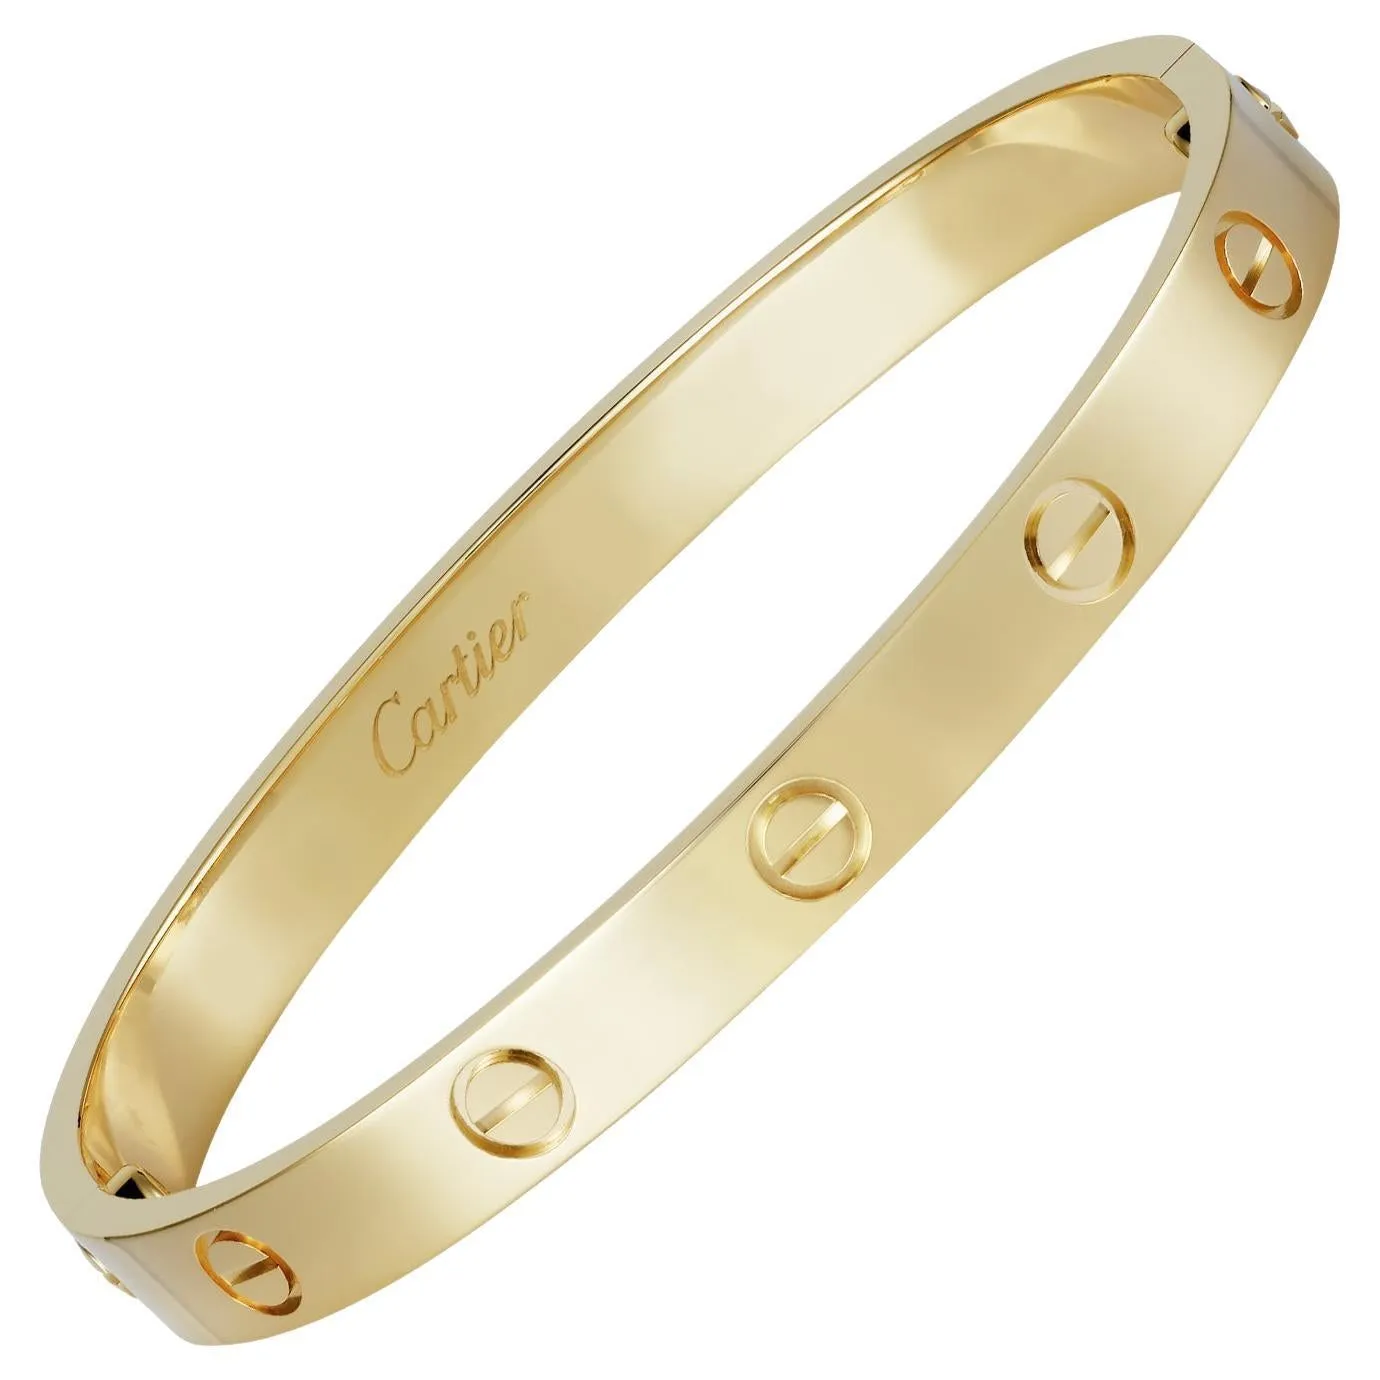 A yellow-gold Cartier Love bracelet pictured with a right-leaning slant 